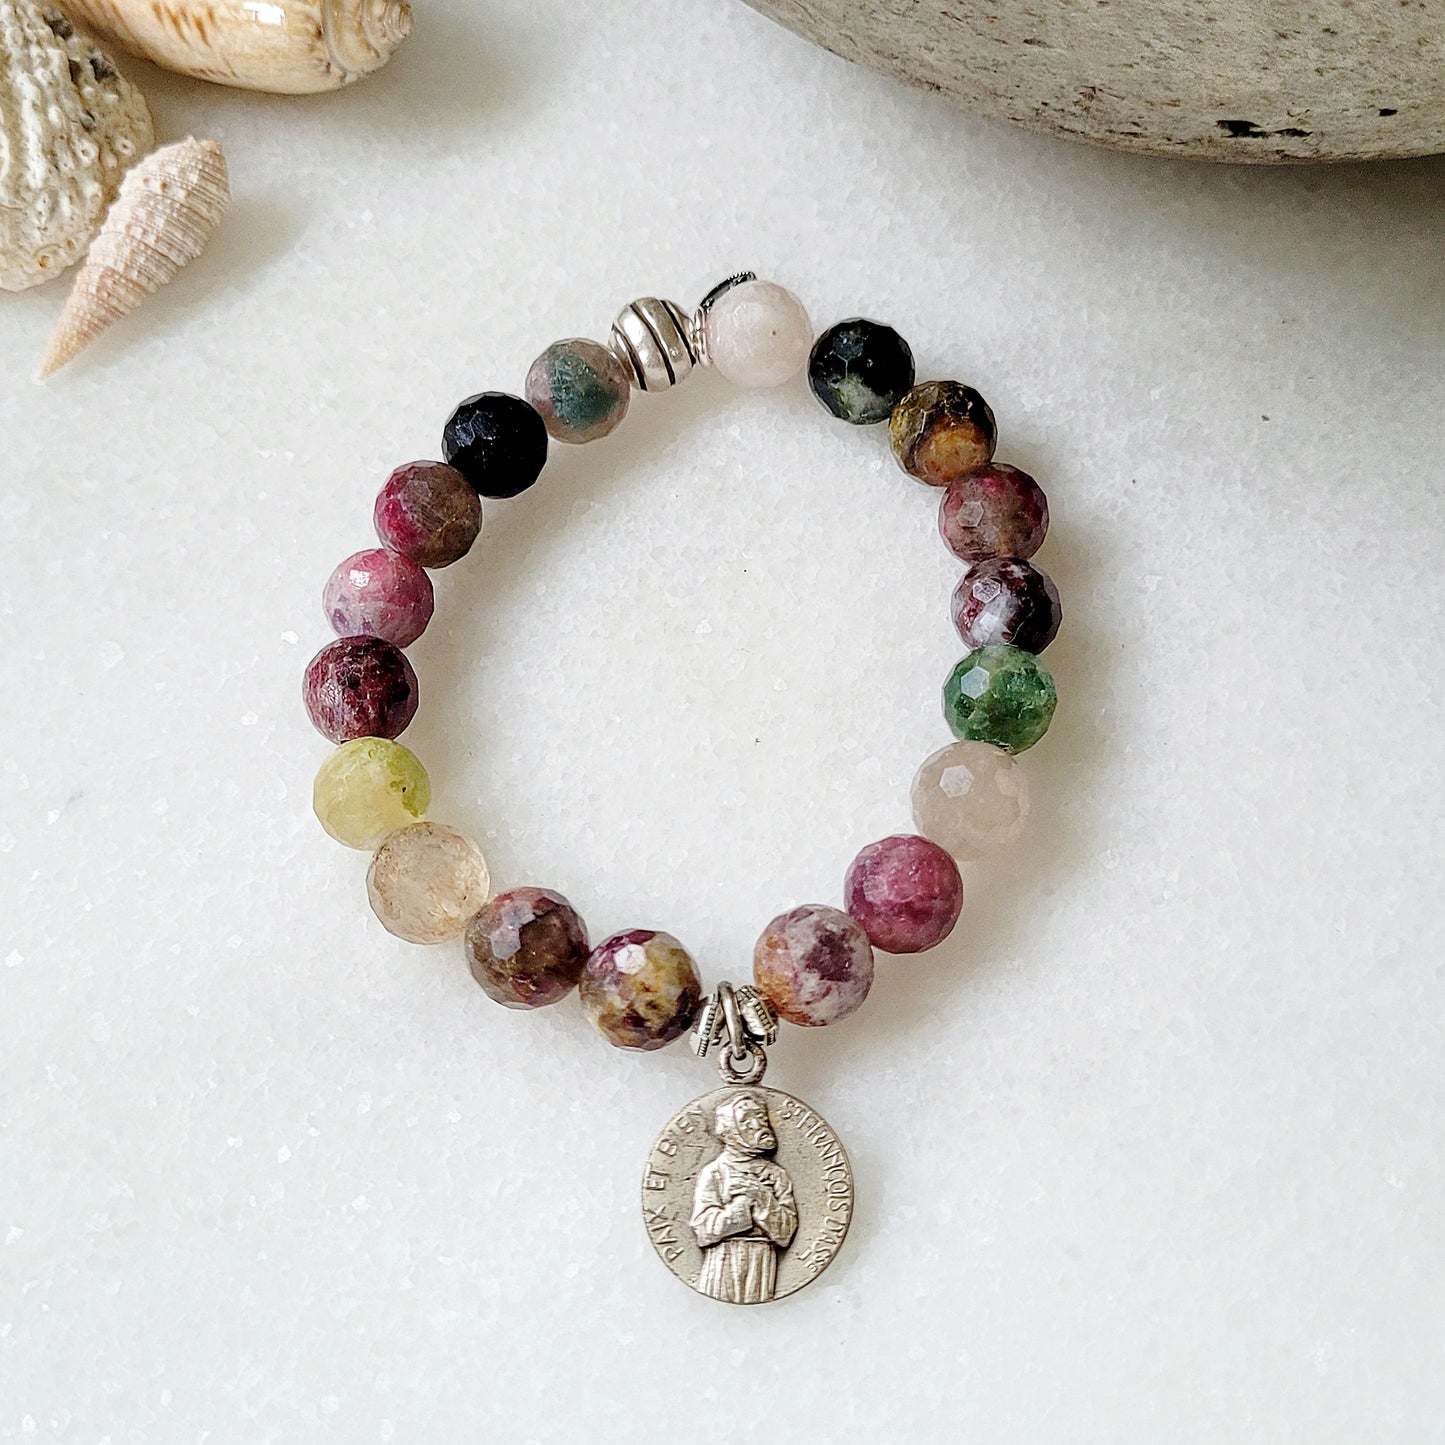 Red Sapphire Faceted 10mm Beaded Bracelet w/ St. Francis / St. Clare of Assisi Silver Medal